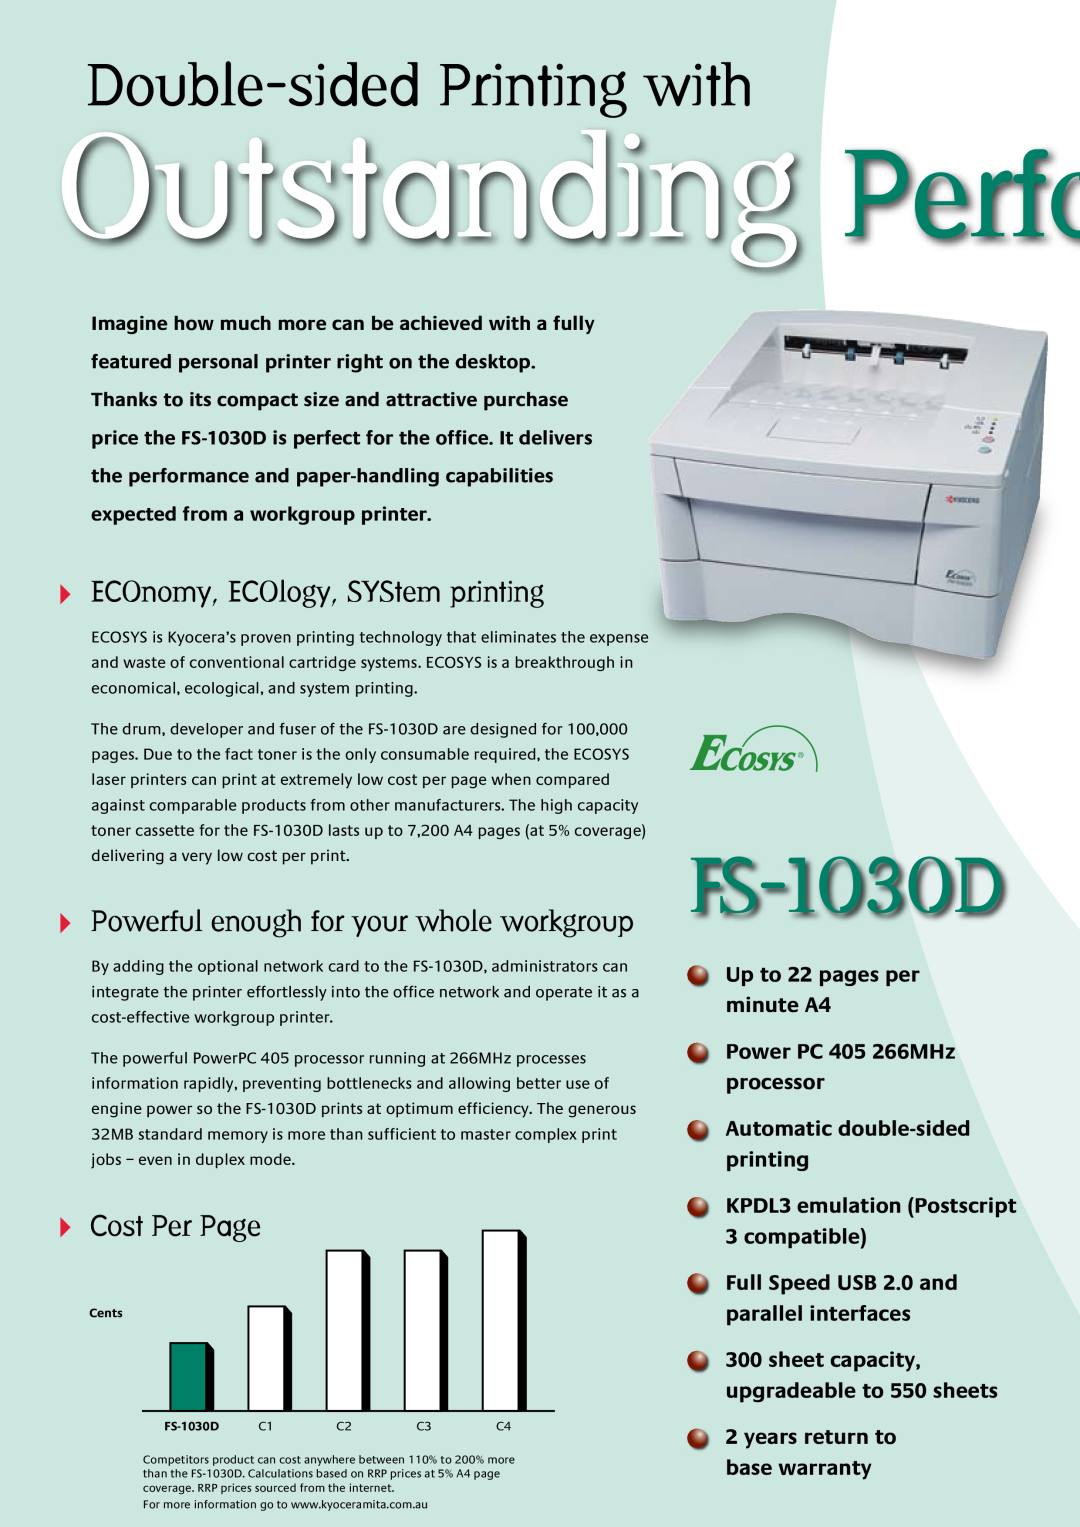 Kyocera FS-1030D manual Outstanding Perfo, Double-sided Printing with, ECOnomy, ECOlogy, SYStem printing, Cost Per Page 